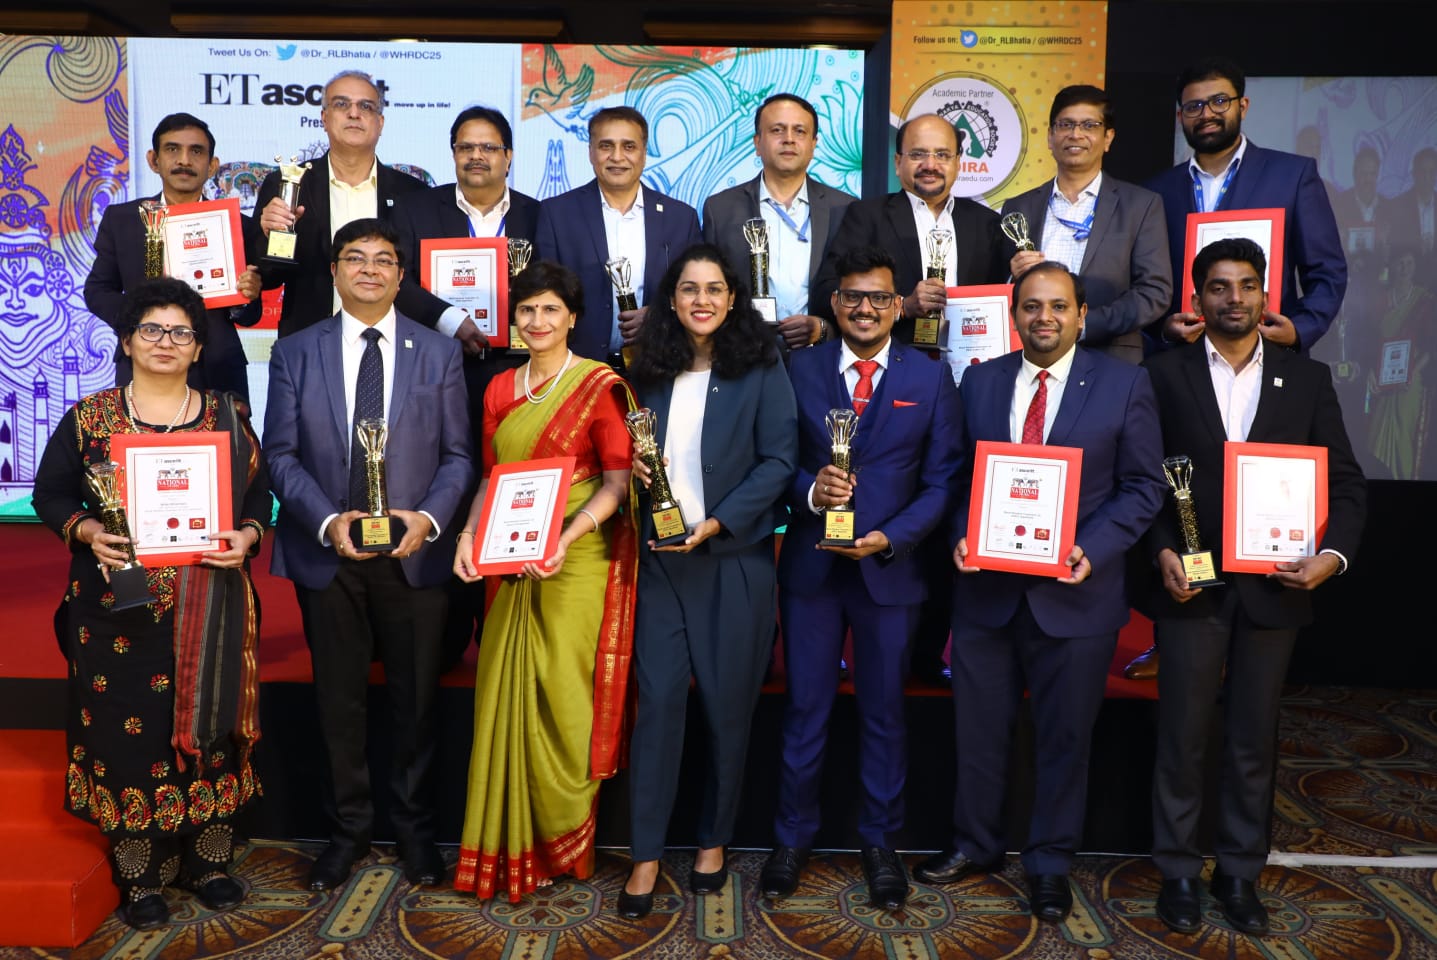 ‘Asia Pacific HRM Congress Awards’  by ET Ascent in 17 Categories